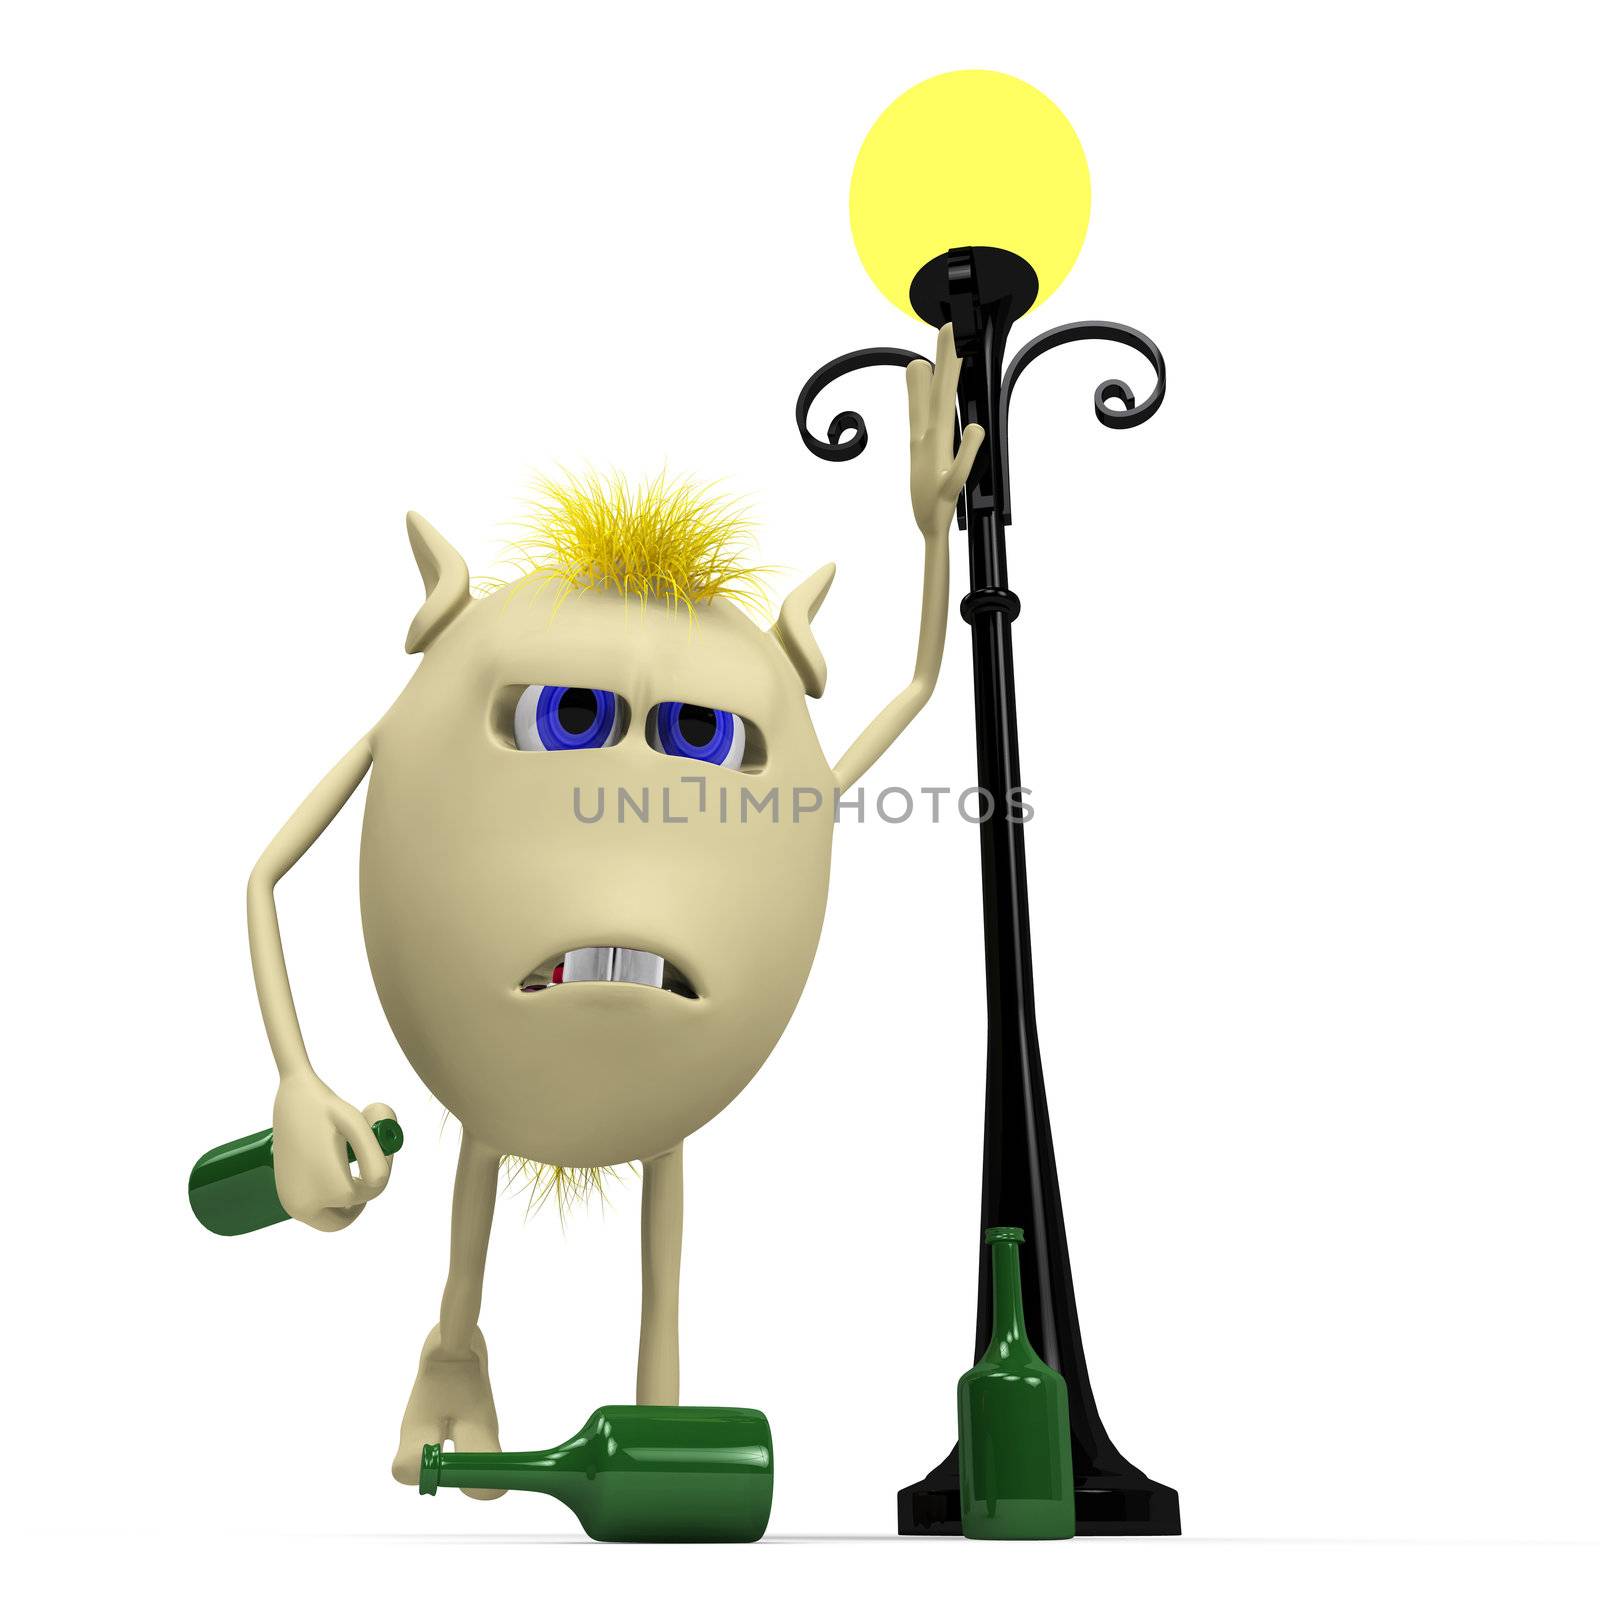 Haired drunkard puppet standing near metal latern by vetdoctor